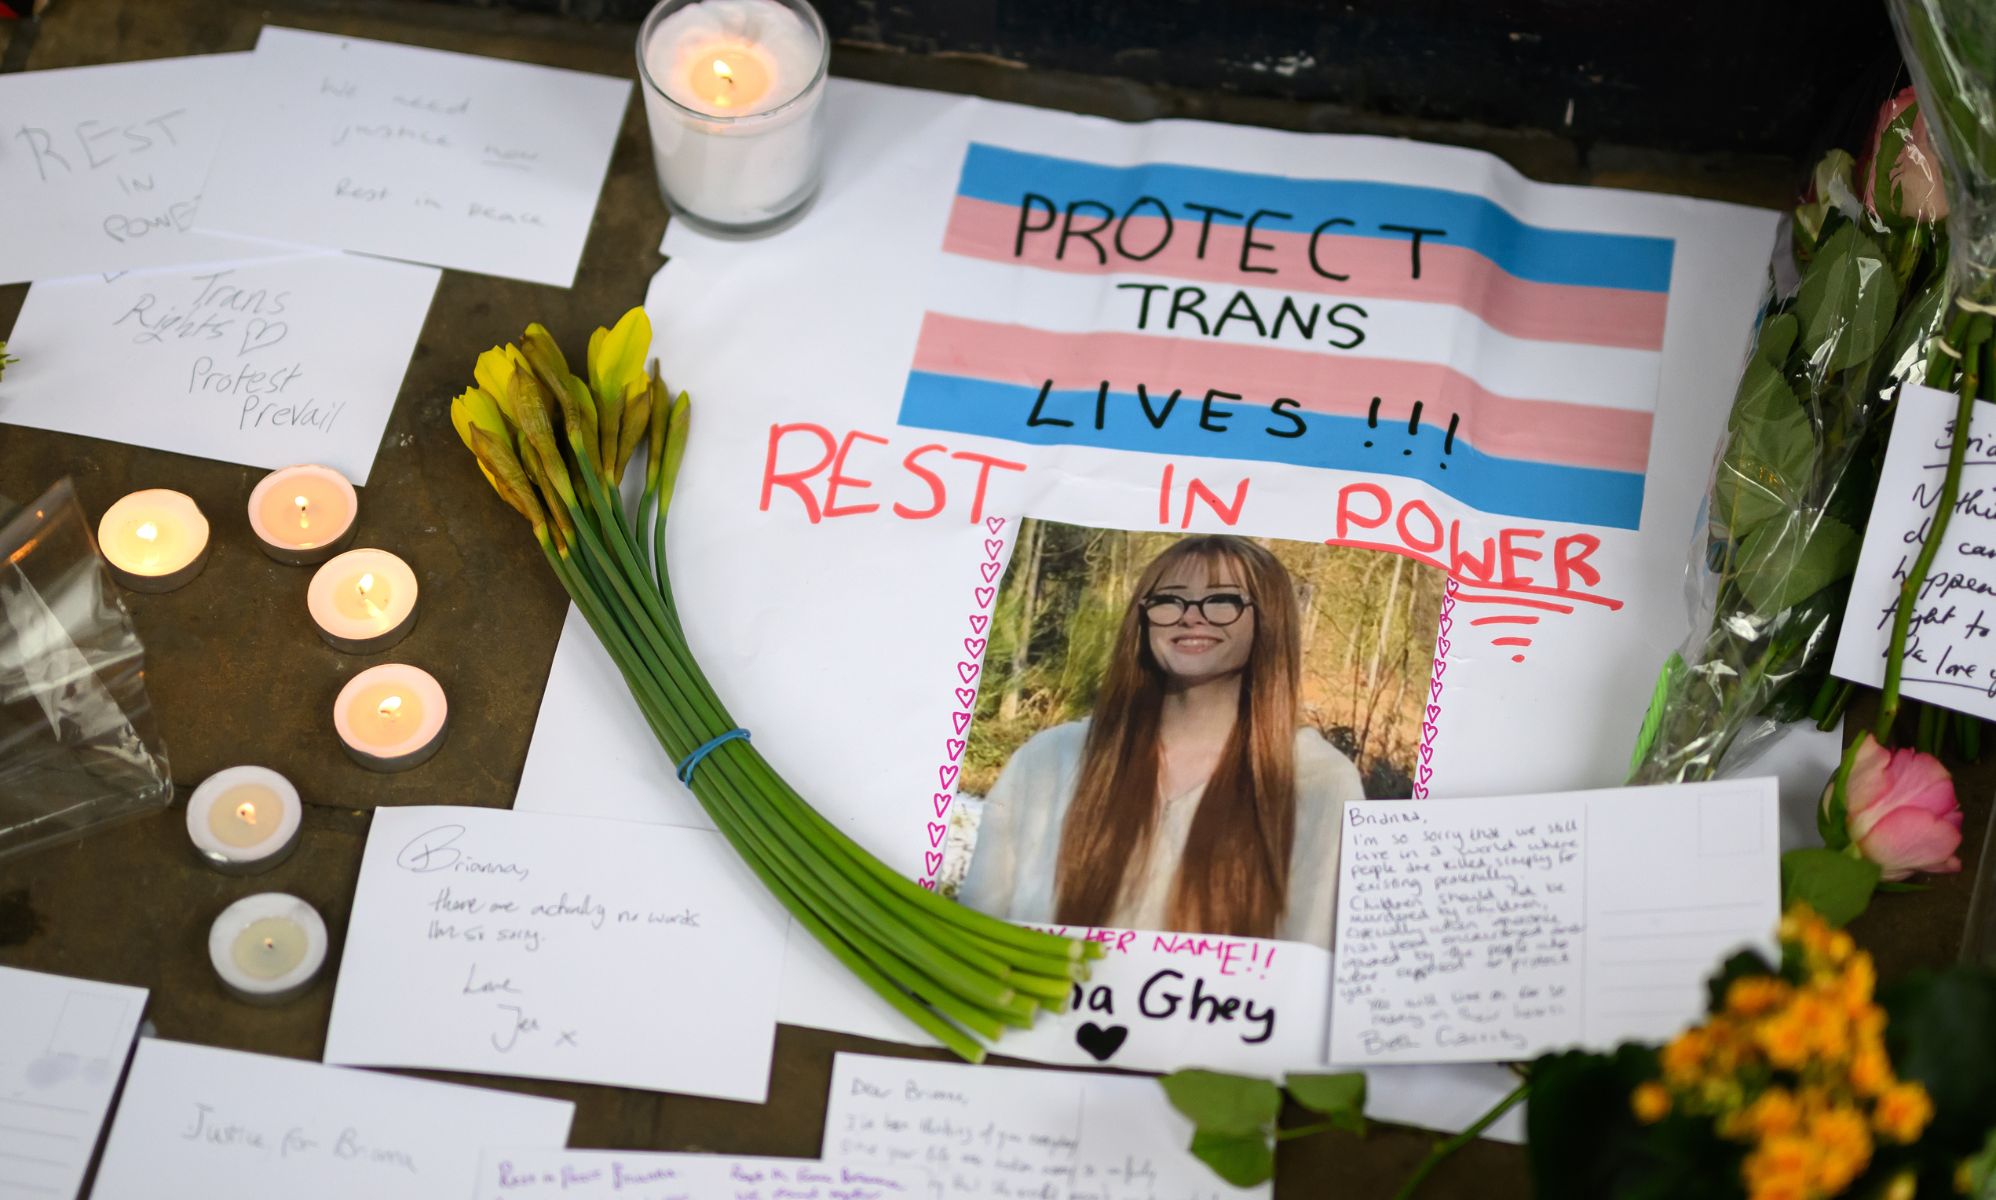 Brianna Ghey: UK a ‘dangerous country to be trans’, say mourners